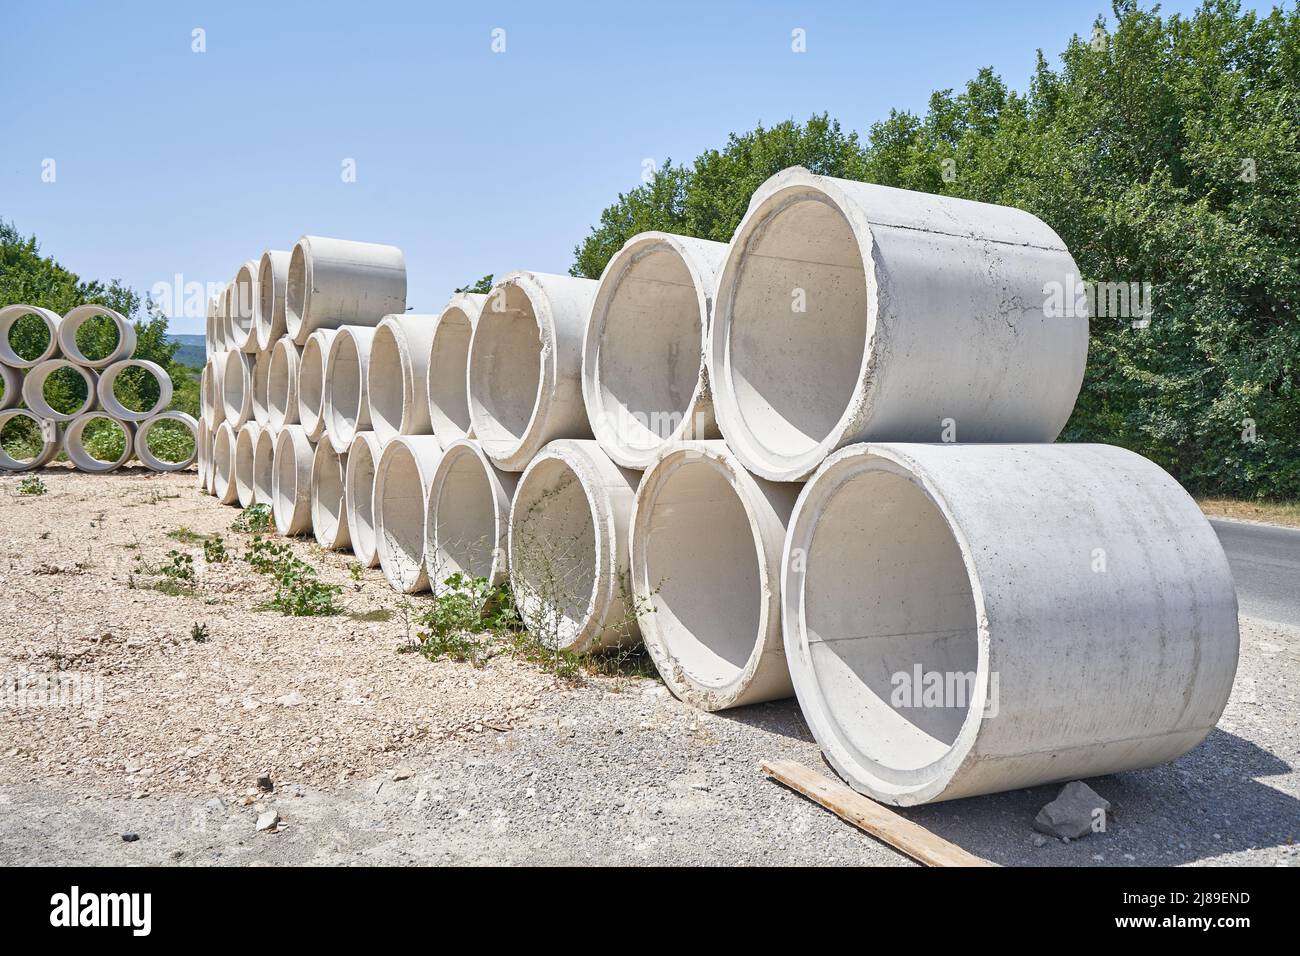 Concrete reinforced drainage pipe for septic system and wells Stock Photo